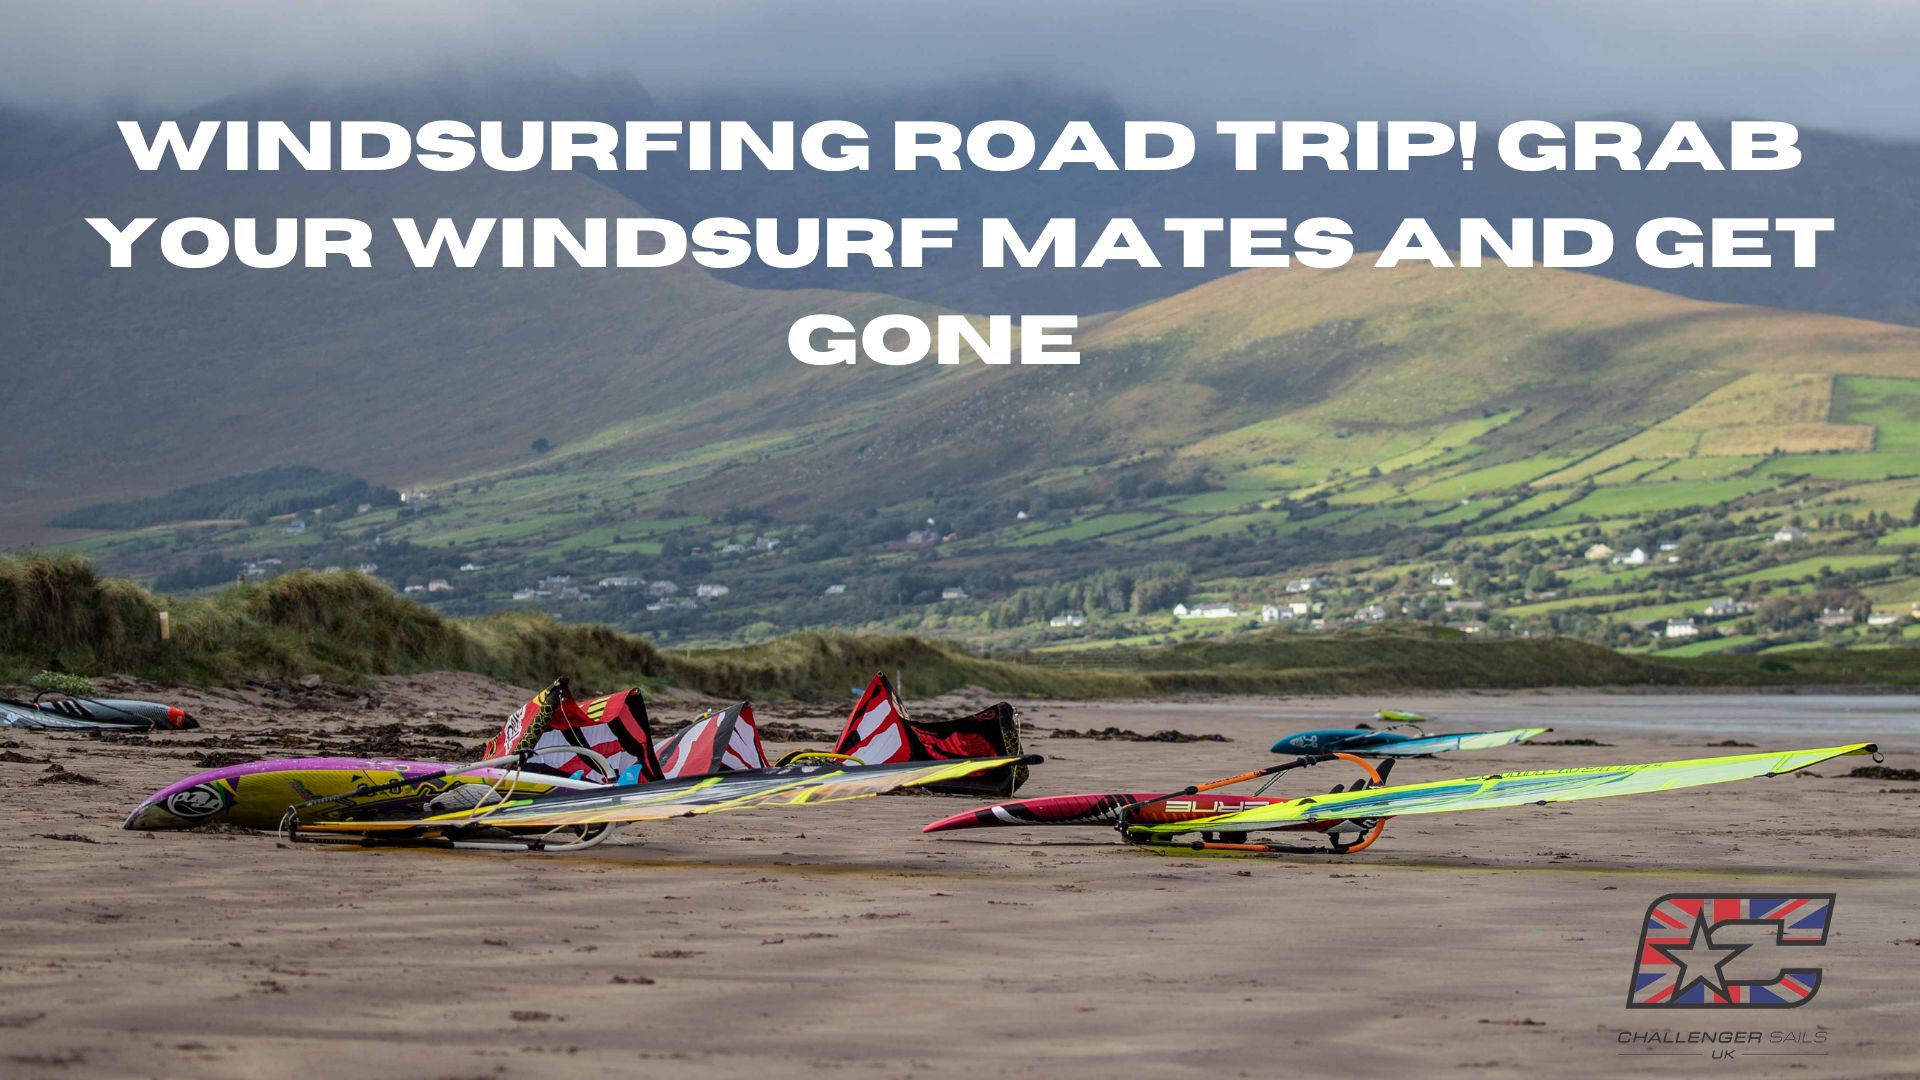 Windsurfing road trip! Grab your windsurf mates and get gone…